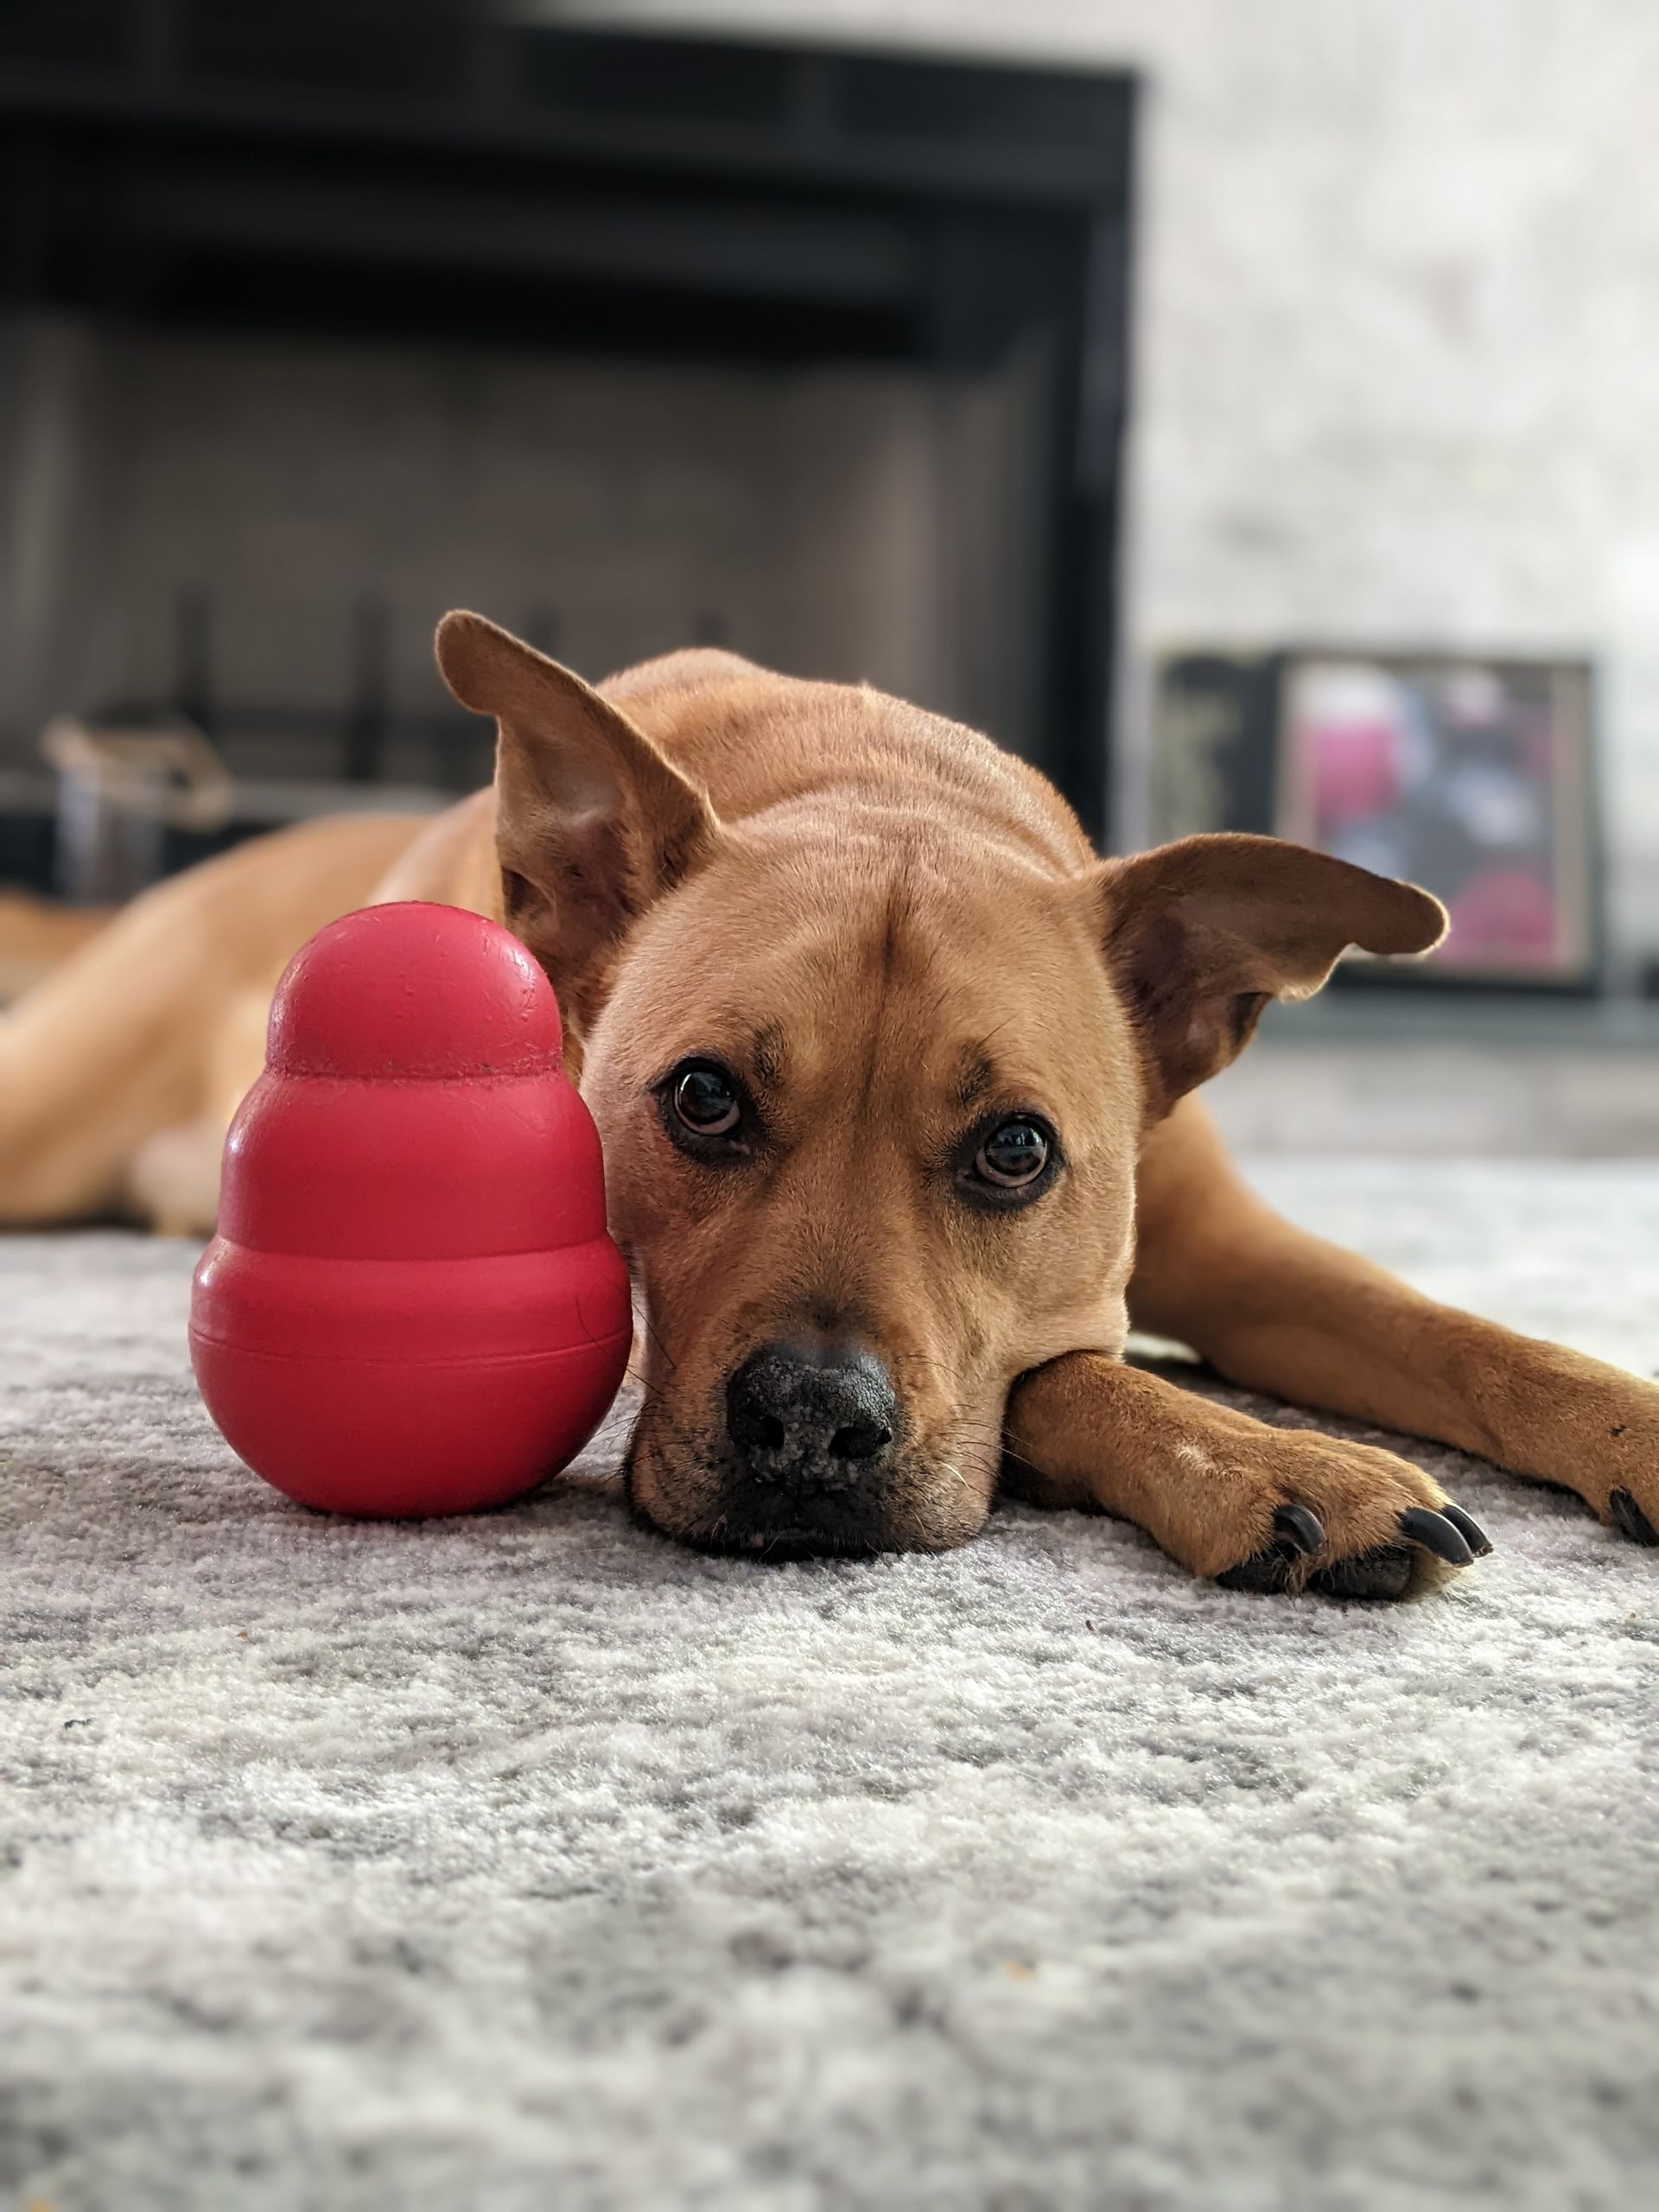 A dog is lying on the floor next to a red ball.